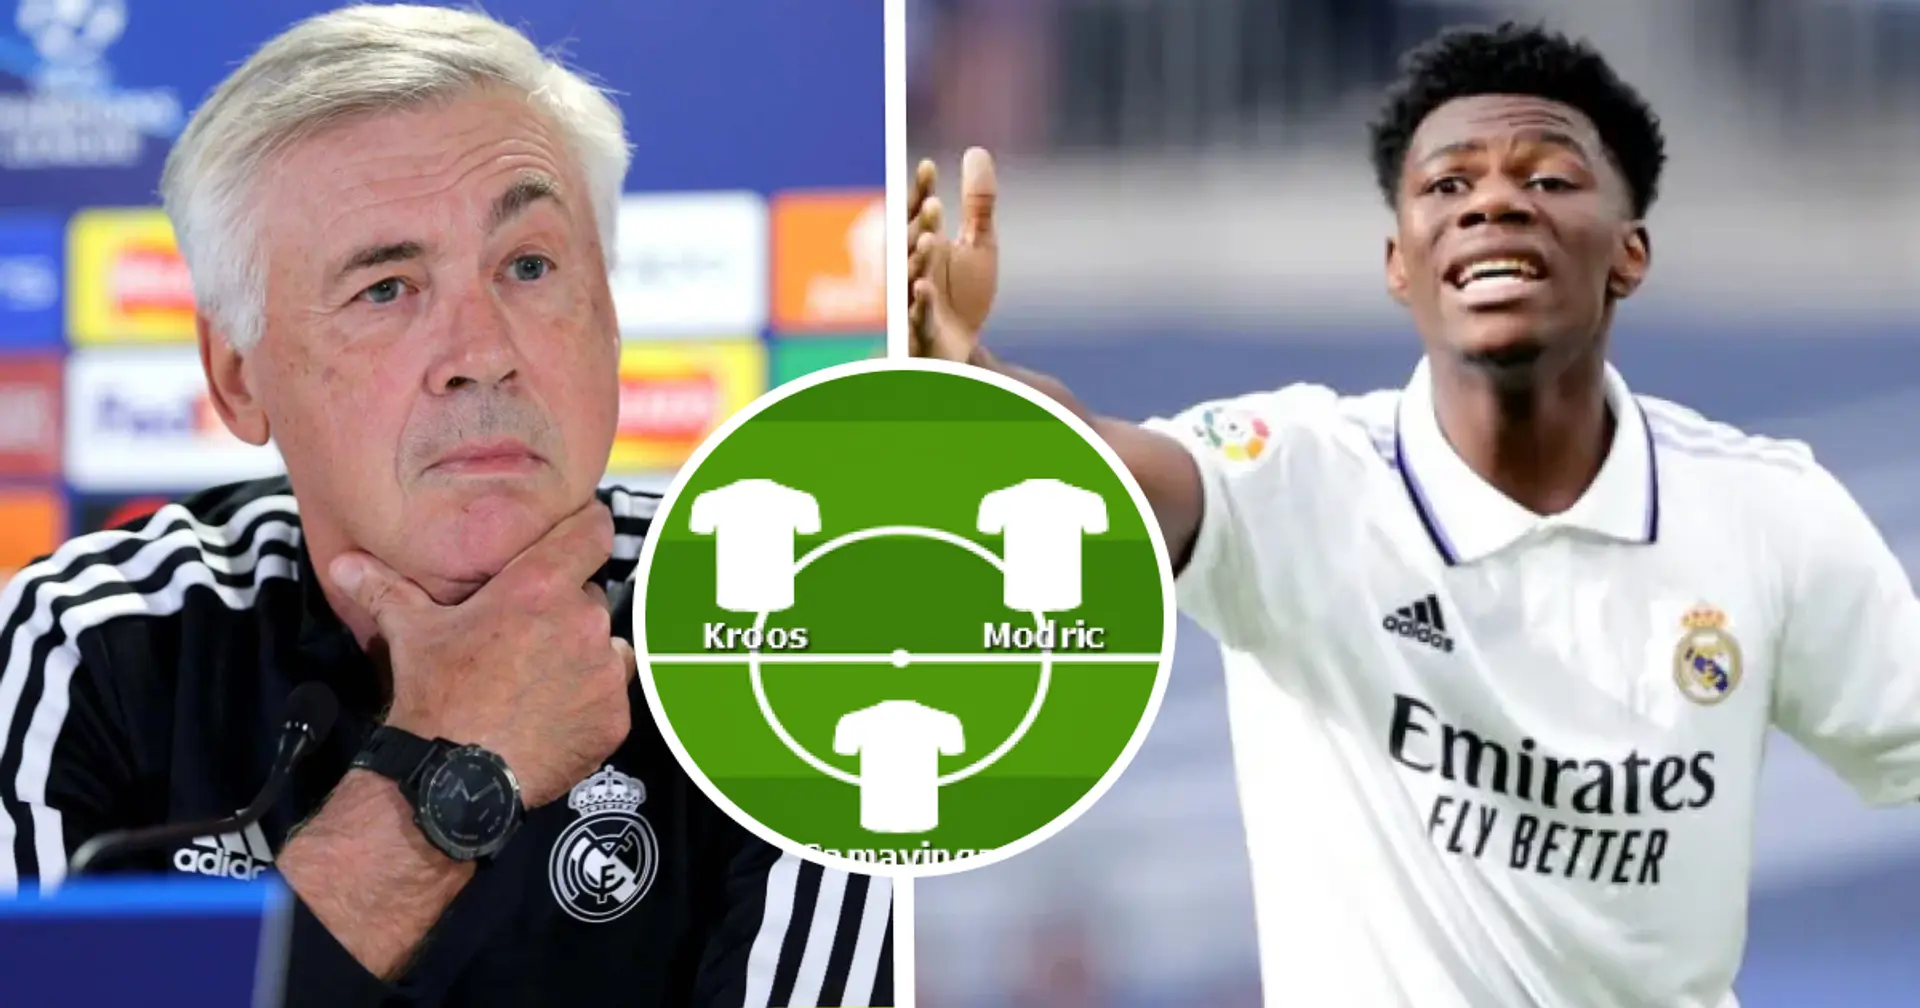 2 players out for the Blancos: Team news and probable lineups for Real Madrid vs Celtic clash